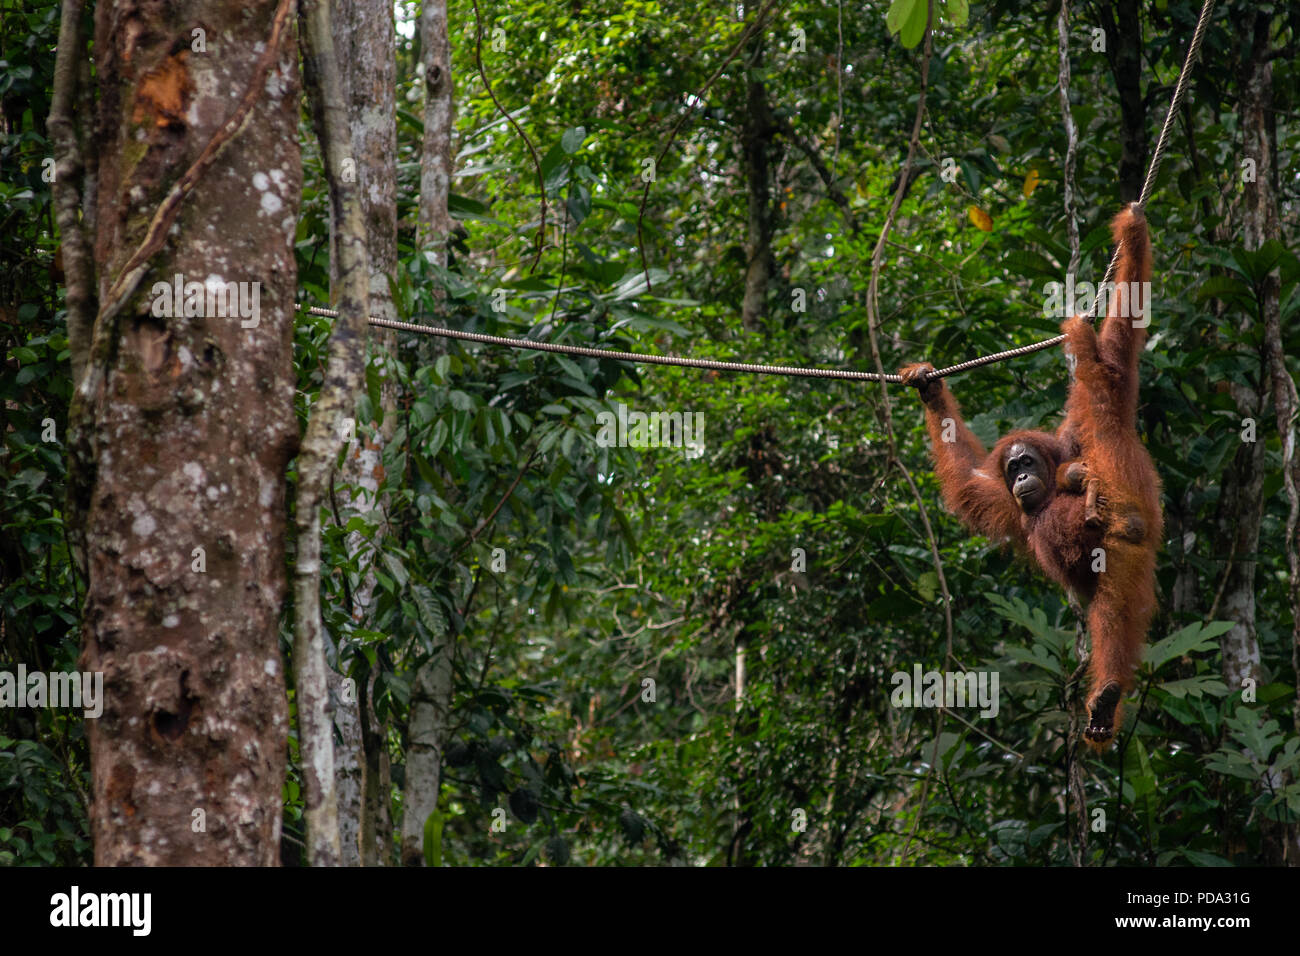 A female orangutang with her new born baby clinging to her side swing along a rope in the jungle at the Semenggoh Nature Reserve, Kuching, Borneo, Ind Stock Photo